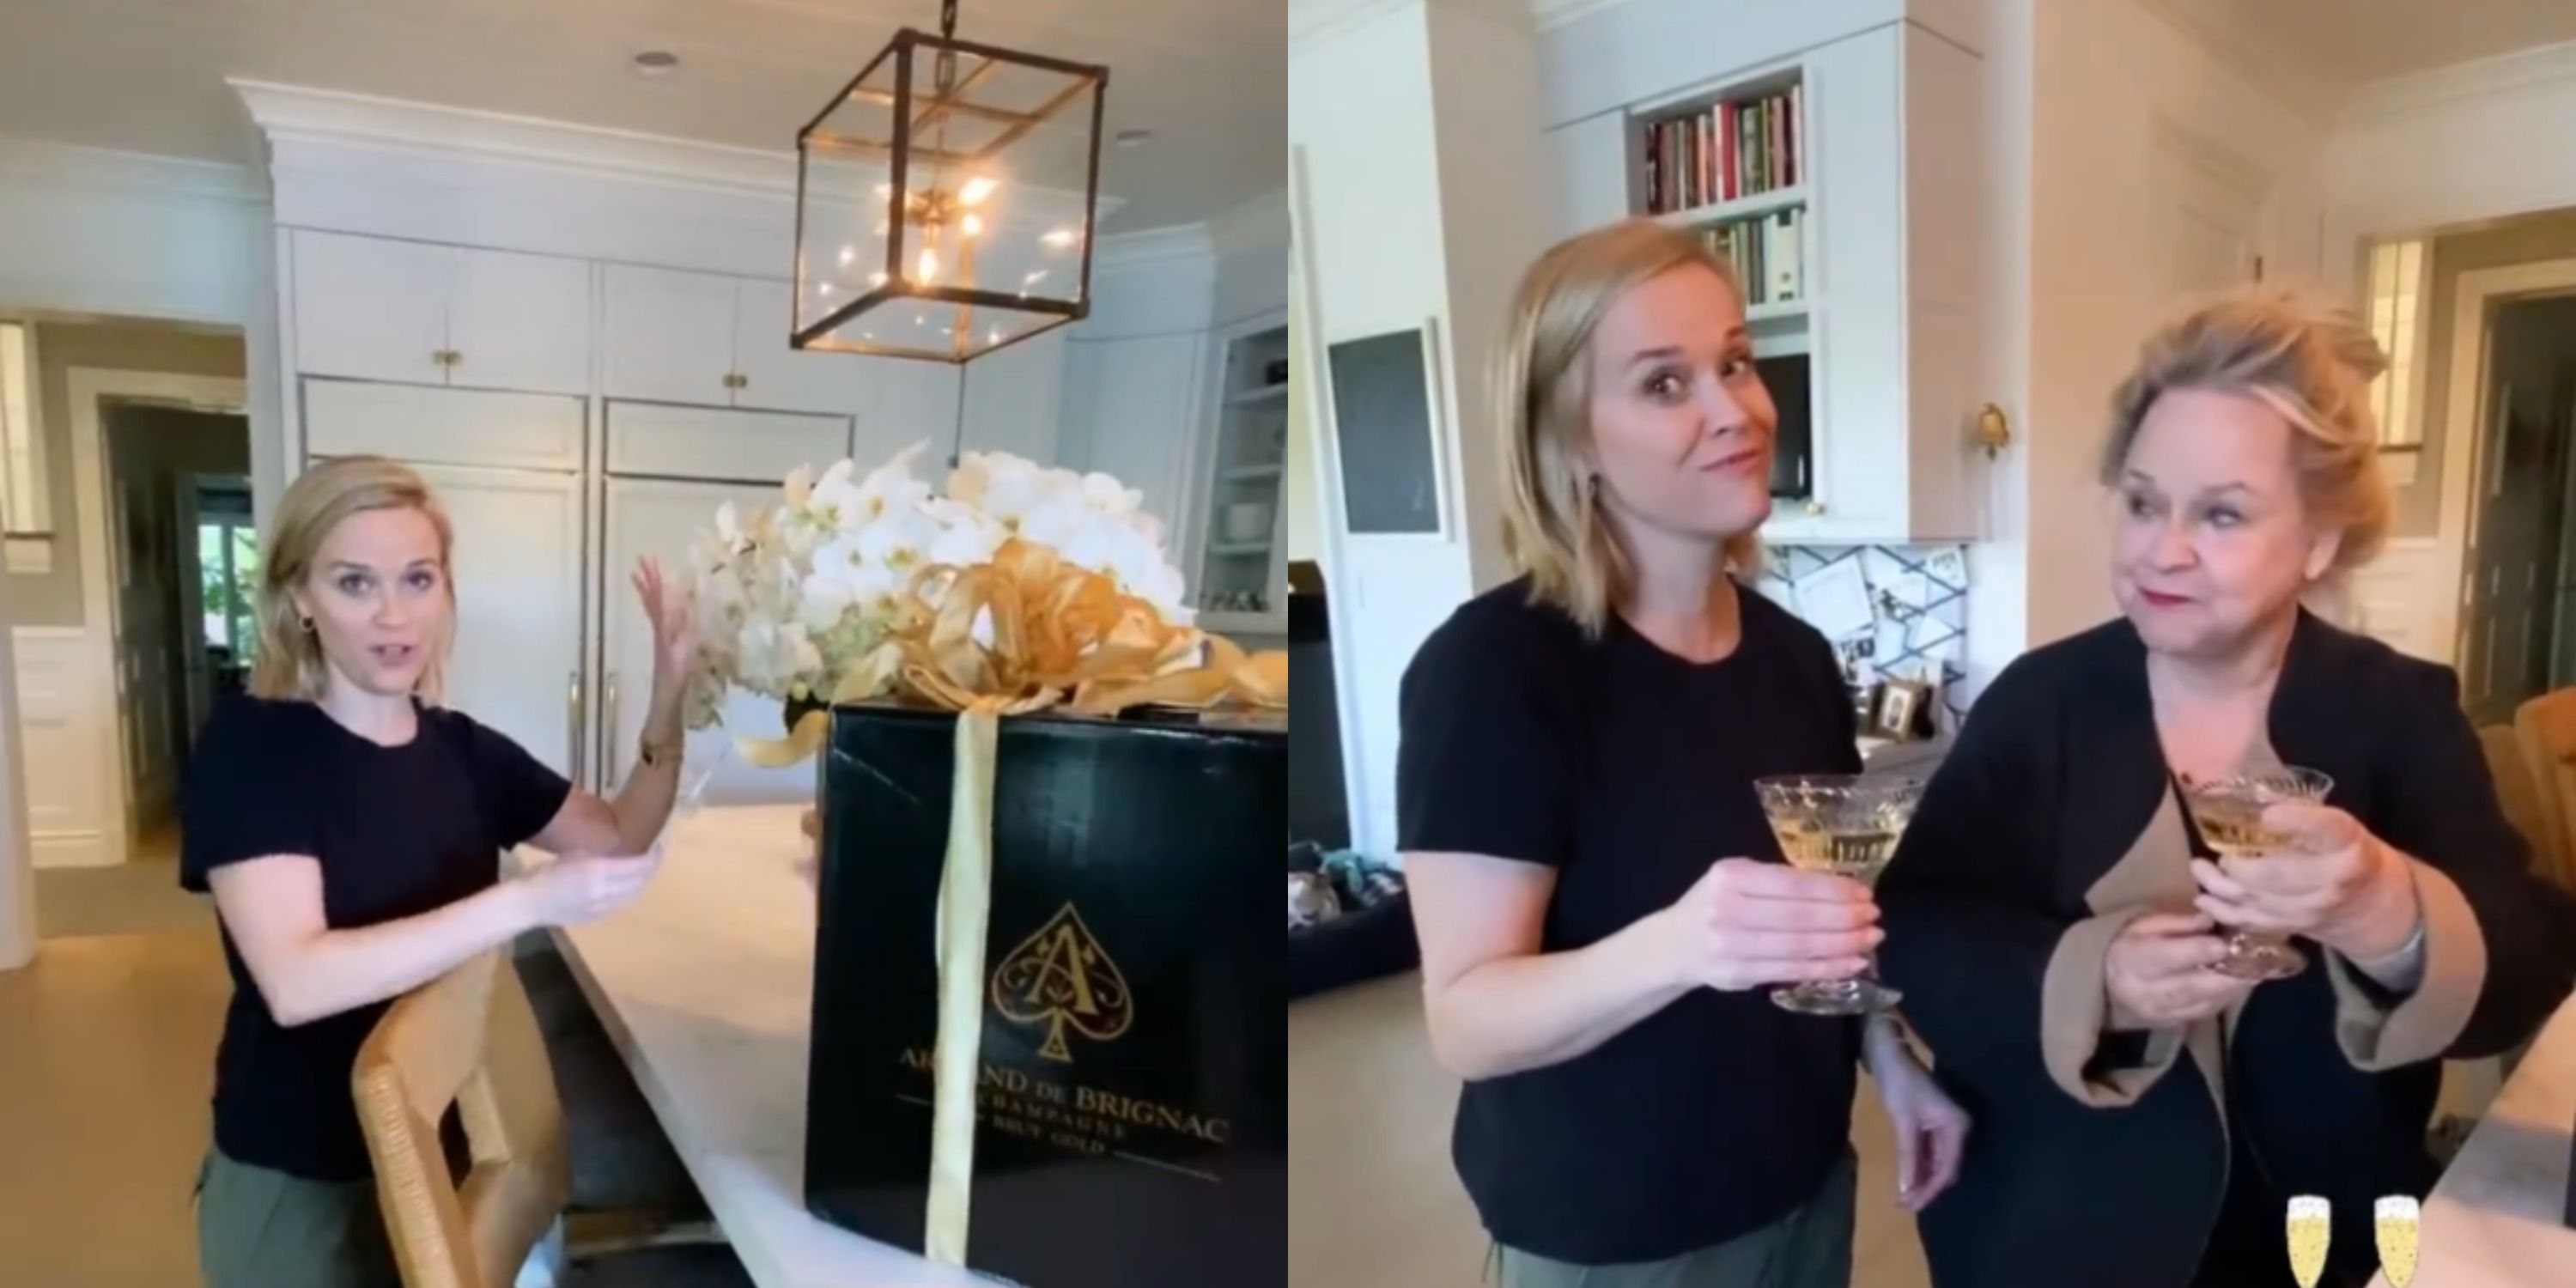 Reese Witherspoon Drank Some Of Beyoncé And Jay-Z's Champagne